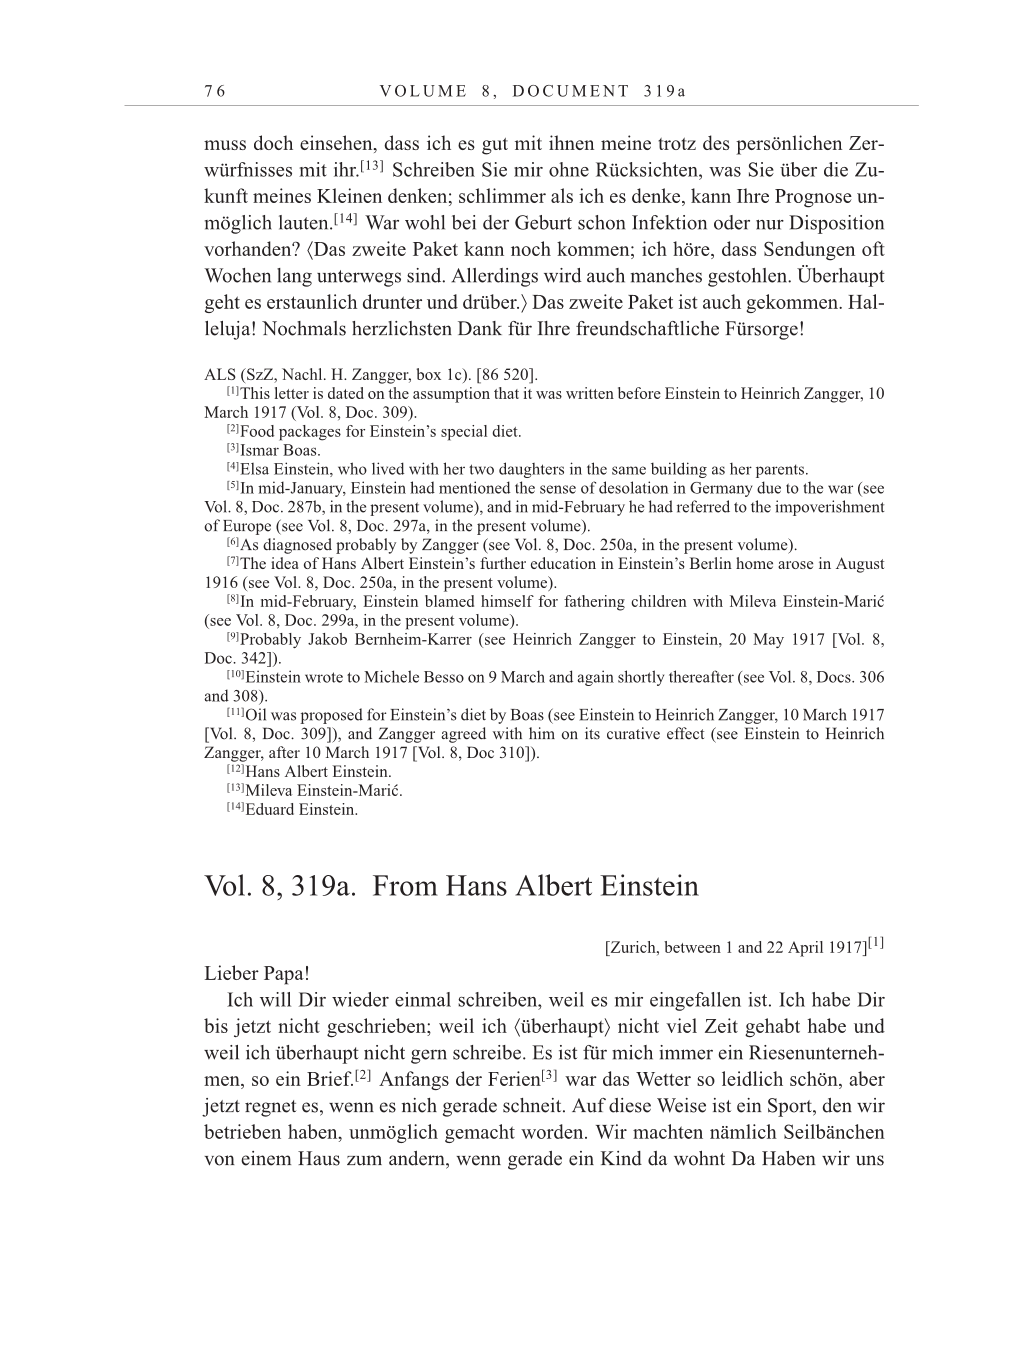 Volume 10: The Berlin Years: Correspondence May-December 1920 / Supplementary Correspondence 1909-1920 page 76